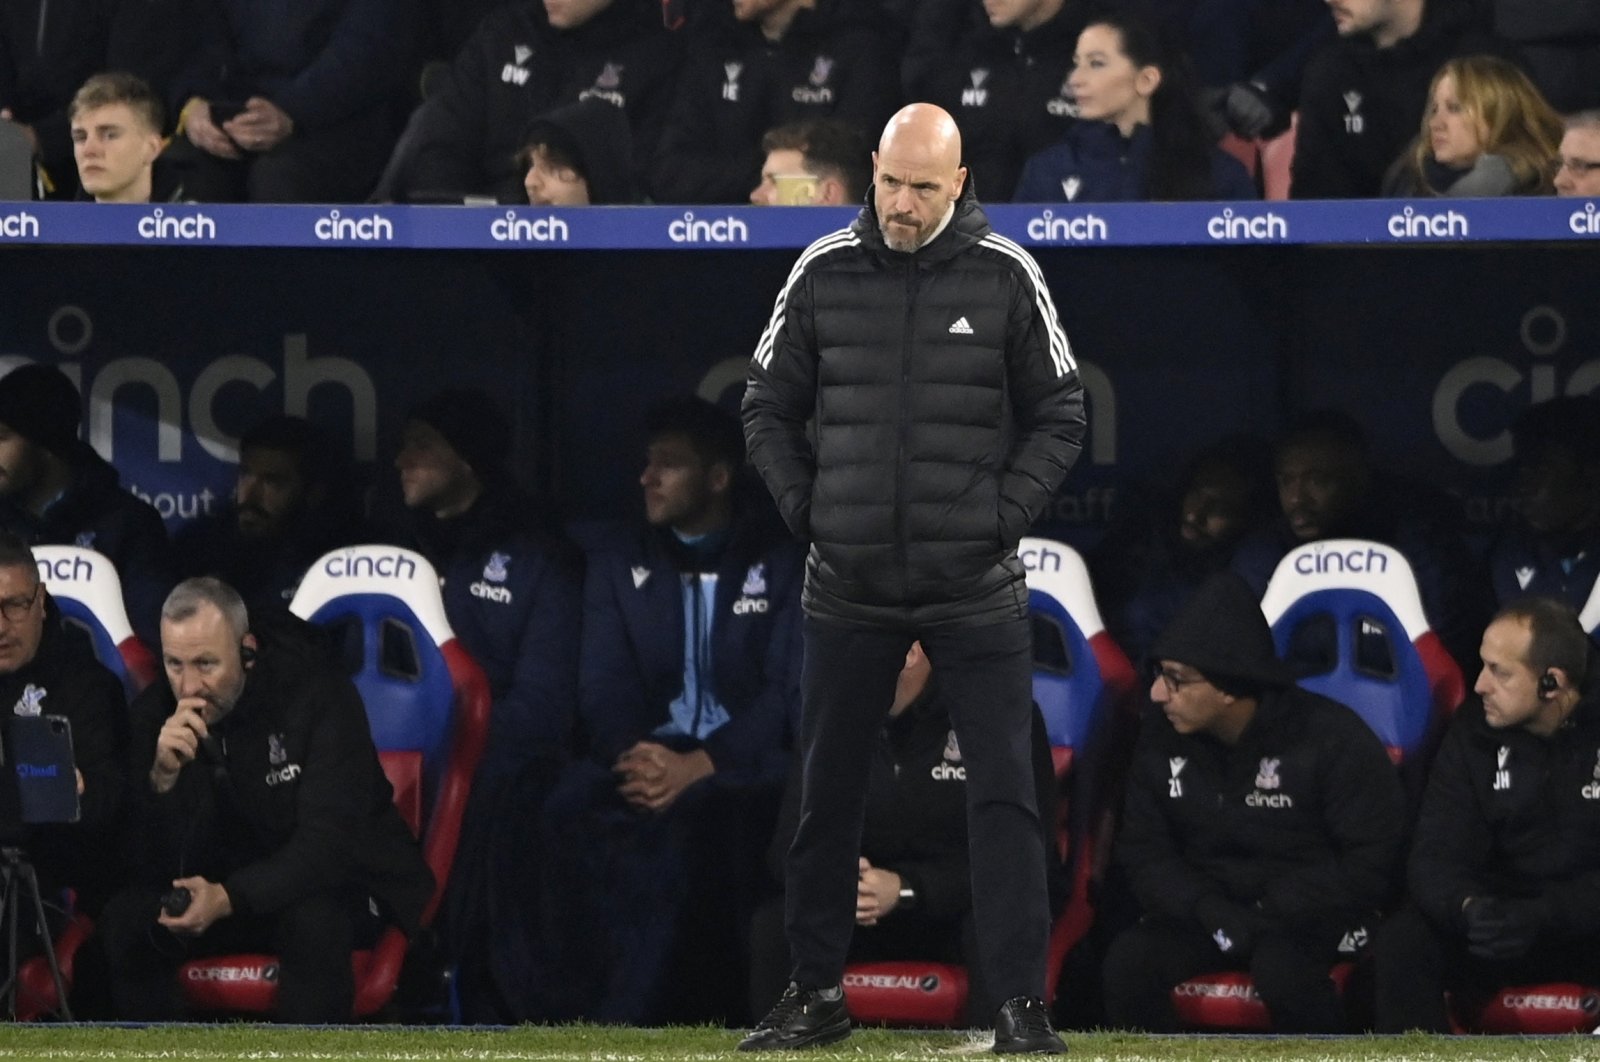 Ten Hag laments dropping points as Man Utd lack clinicality